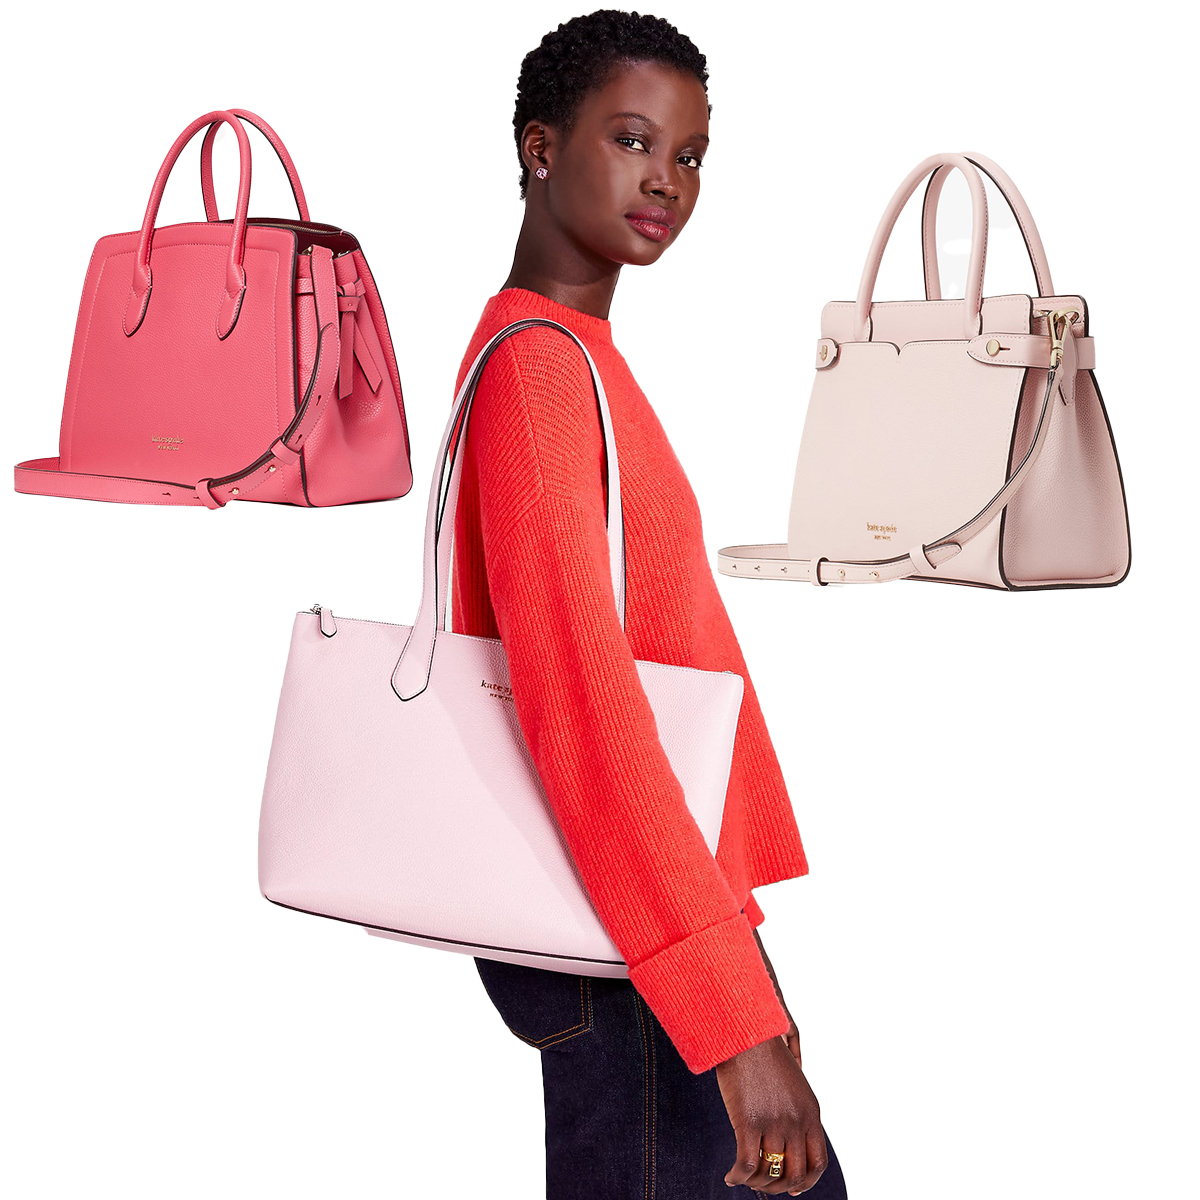 Kate Spade 24-Hour Flash Deal: Get This $300 Tote Bag for Just $69